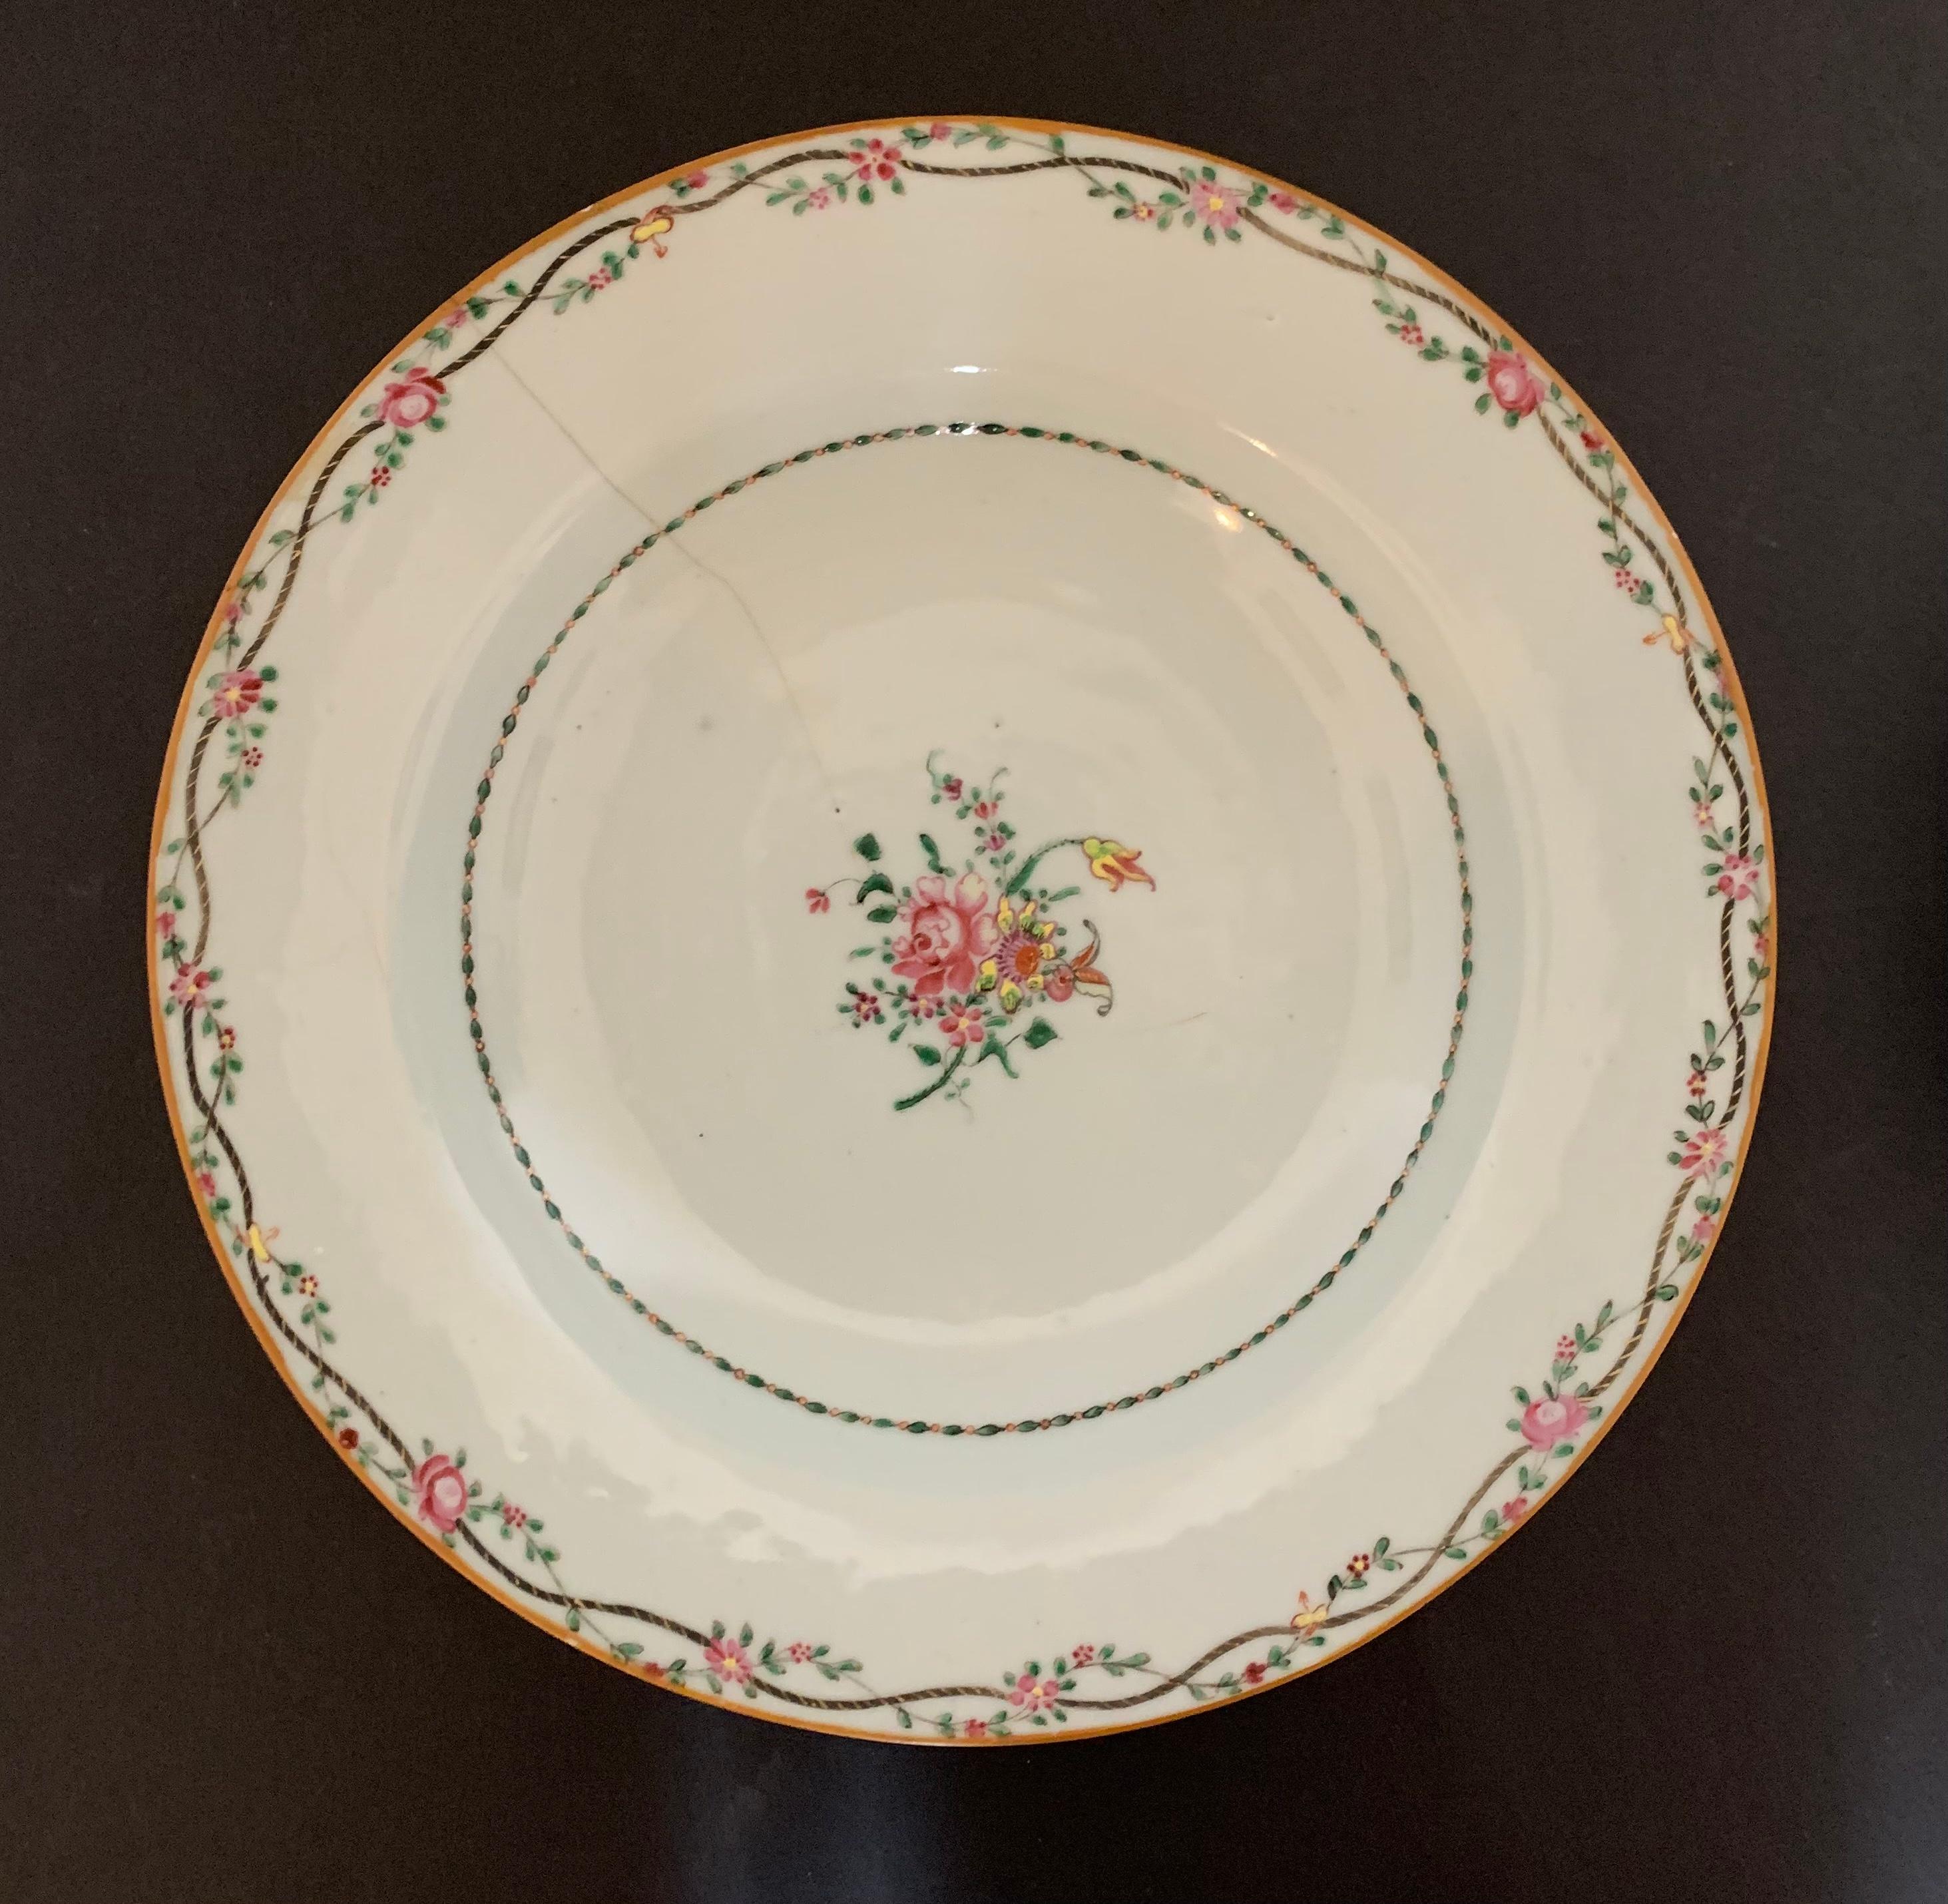 Pair of Chinese plates with floral motifs from the Compagnie des Indes dating from the 18th century. It is decorated in the centre with a flower bouquet. The outline is decorated with a garland of flowers intertwined with an element of